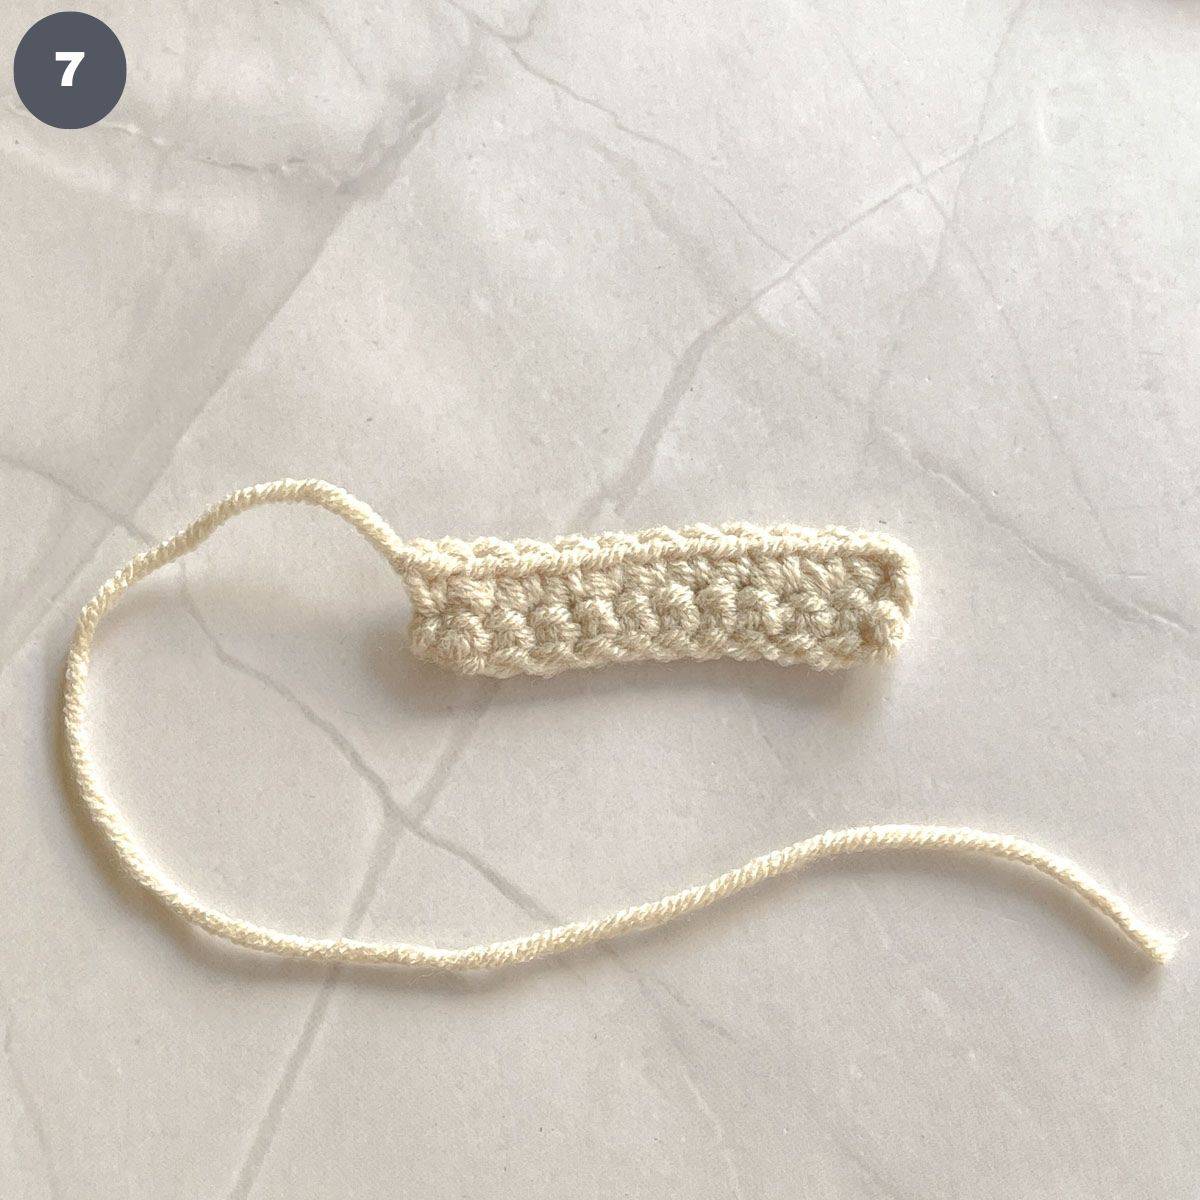 A small piece of rectangle crochet.